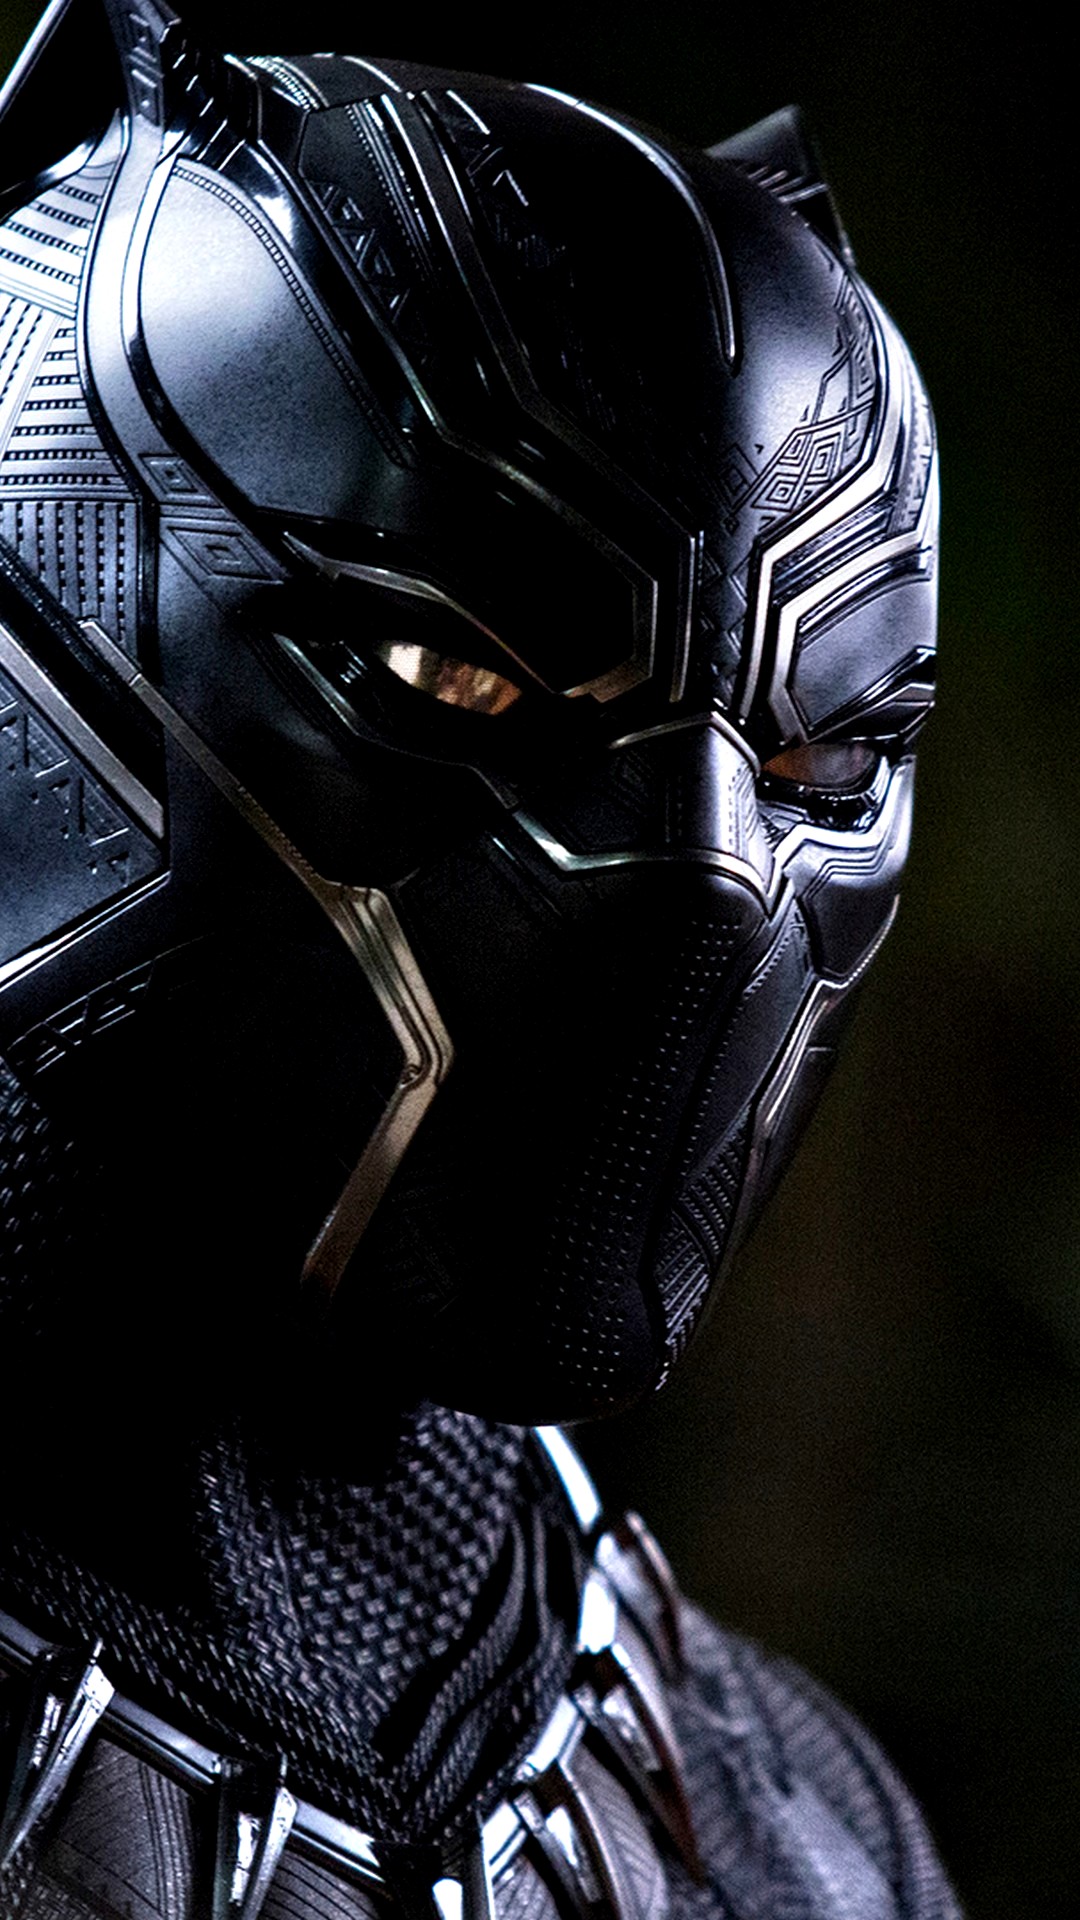 Phones Wallpaper Black Panther with high-resolution 1080x1920 pixel. Download all Mobile Wallpapers and Use them as wallpapers for your iPhone, Tablet, iPad, Android and other mobile devices